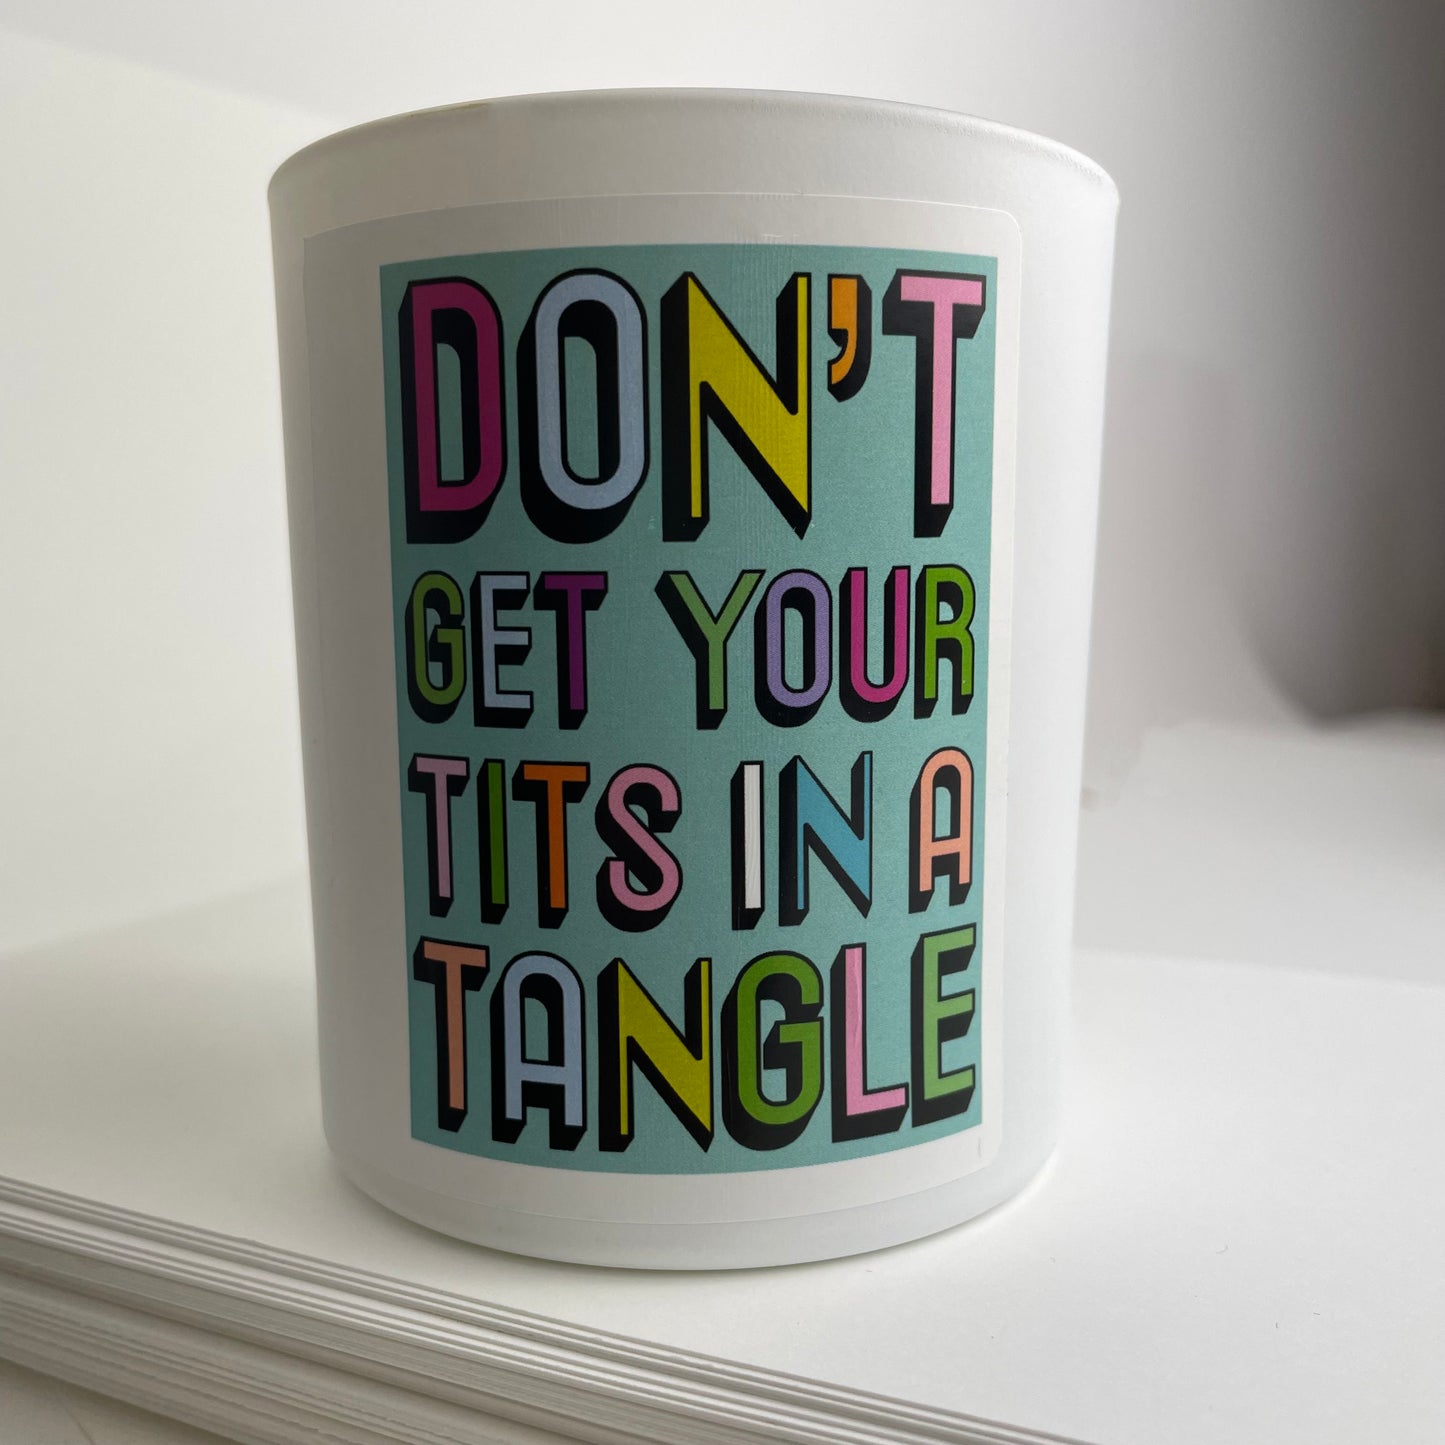 Don't Get Your Tits in a Tangle, cheeky slogan on a white candle Jar